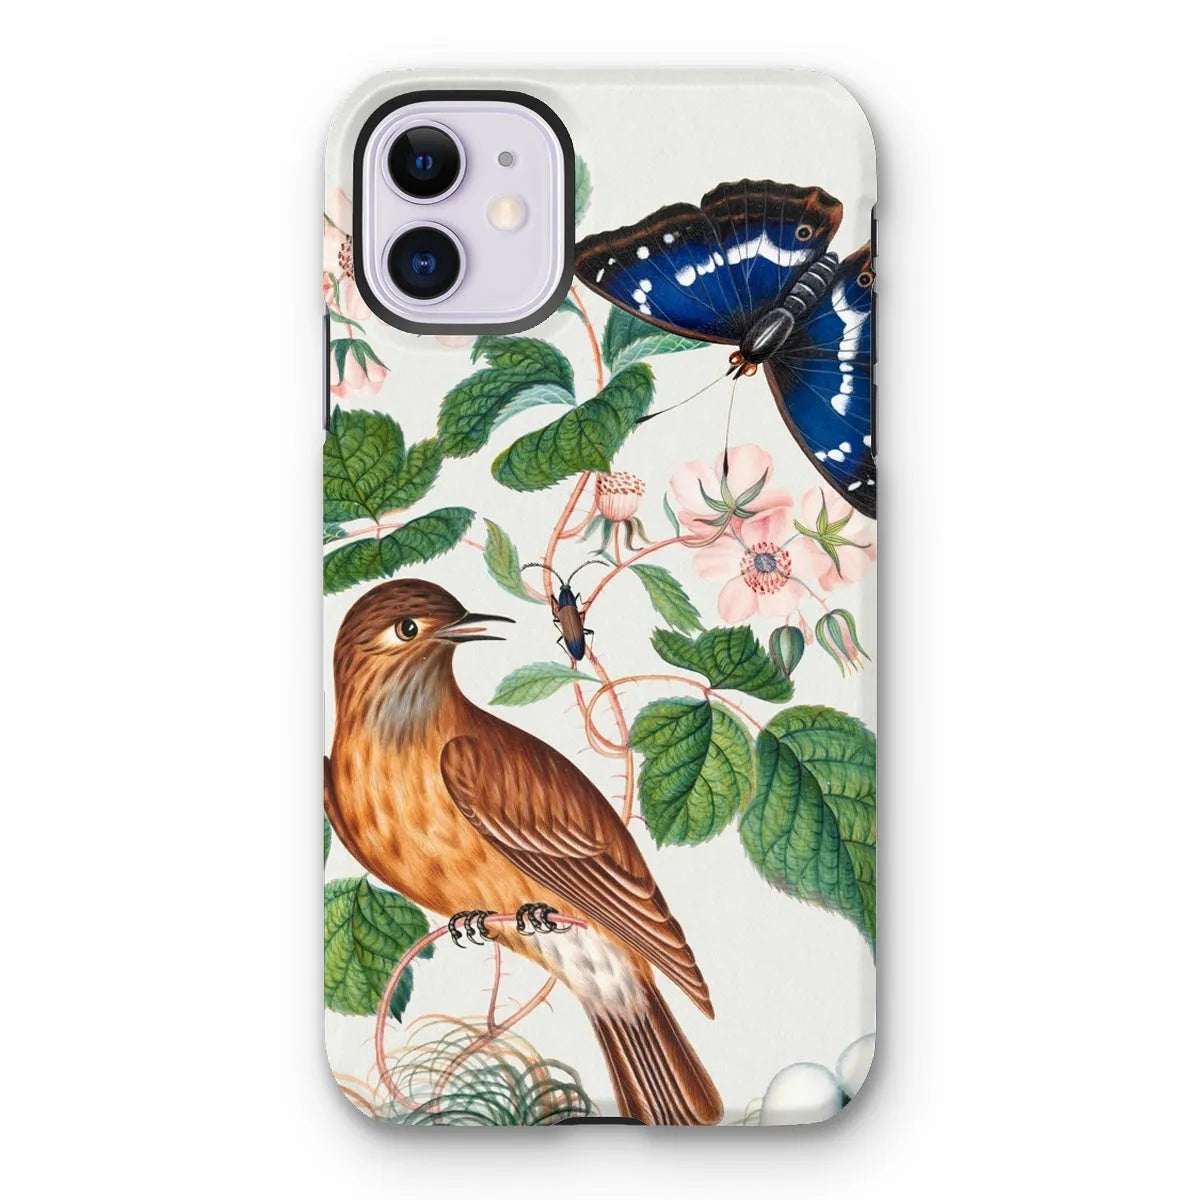 Flycatcher Emperor And Beetle - Art Phone Case - James Bolton - Iphone 11 / Matte - Mobile Phone Cases - Aesthetic Art